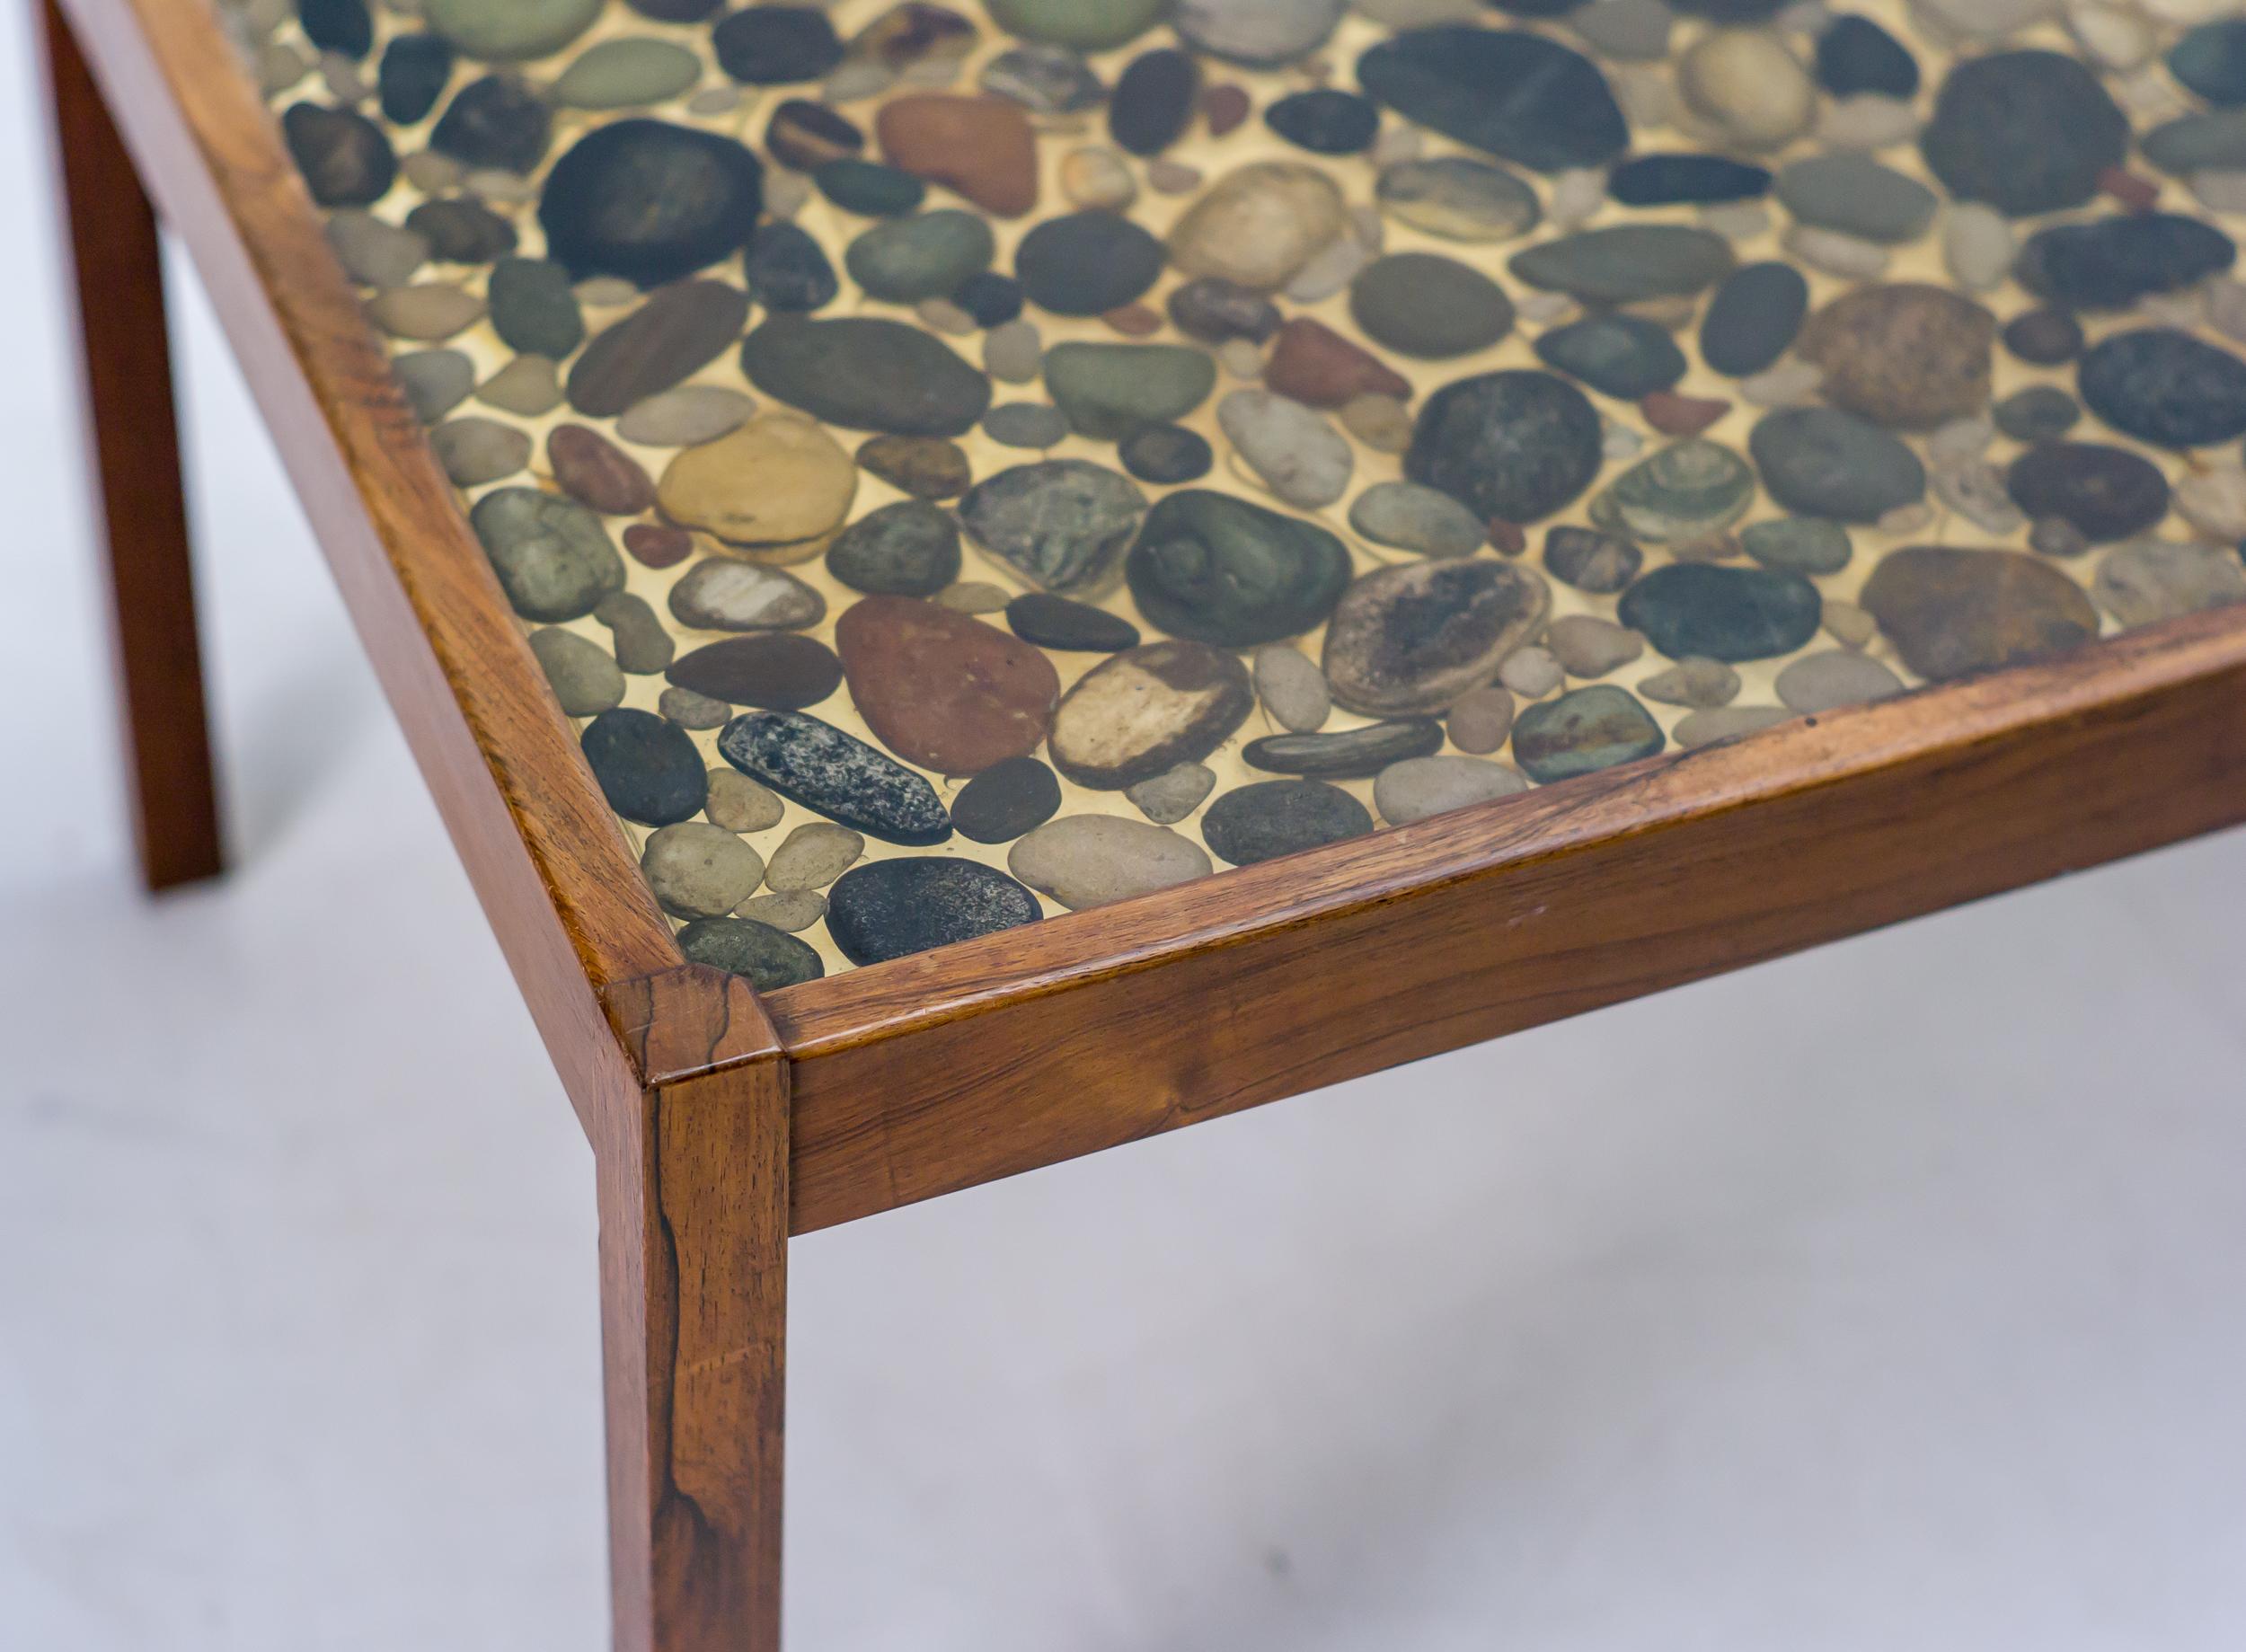 Teak coffee table designed by Ib Kofod-Larsen for Seffle Möbelfabrik.
Remarkable coffee table with a polyester top with cast in natural pebbles.

Ib Kofod-Larsen was born in 1921 in Denmark. Kofod-Larsen was trained as a cabinetmaker with the